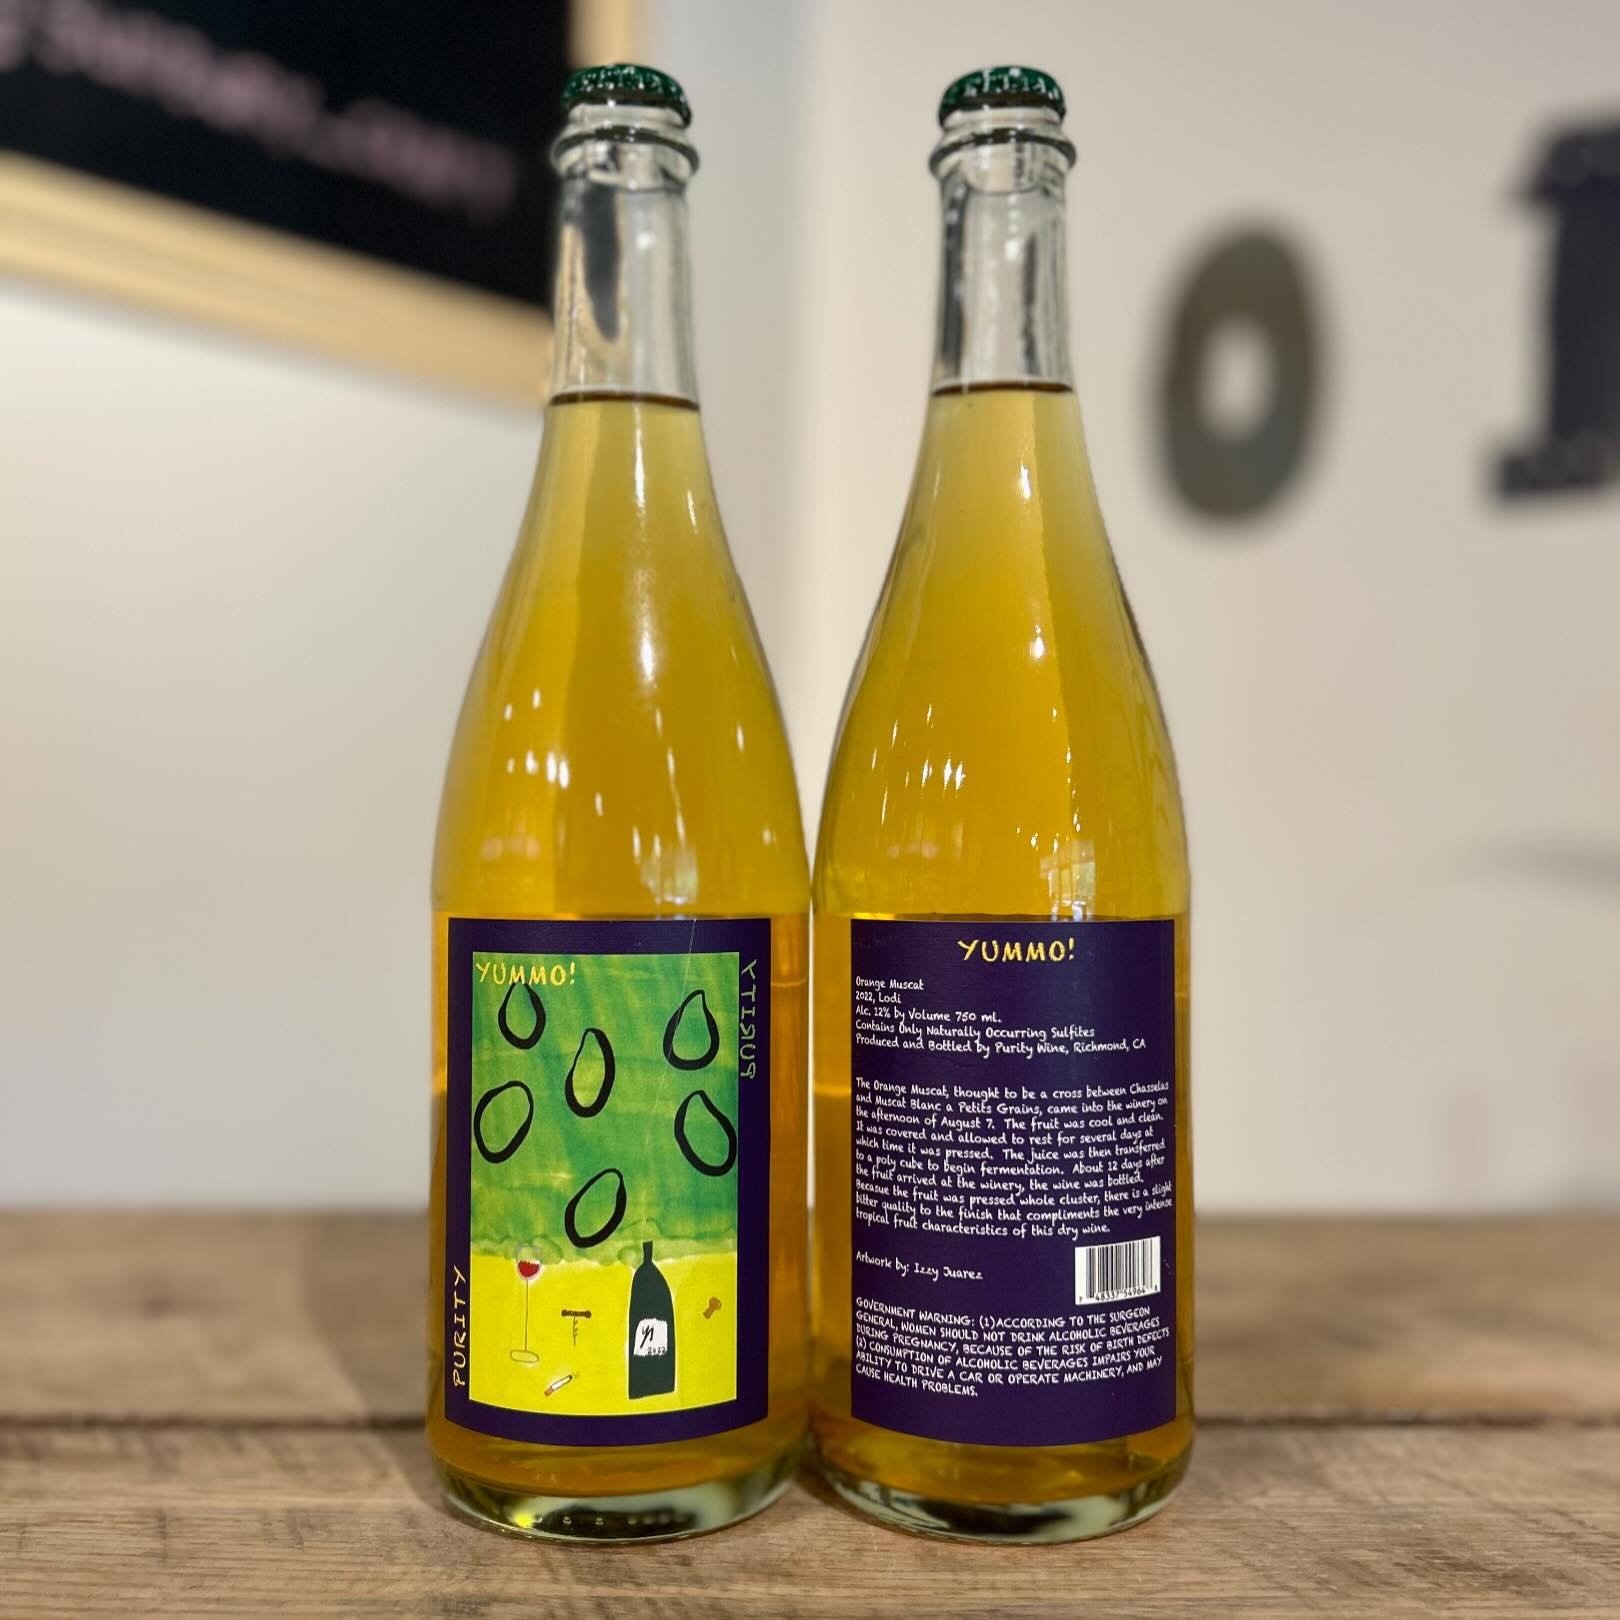 Introducing @puritywine #NowAvailable #SudburyCraftBeer #NaturalWine
&mdash;
About the producer: 
Noel and Barrie, with backgrounds in hospitality, started Purity Wine in 2013 to pursue their passion for wine and farming. Purity is the lodestar of th